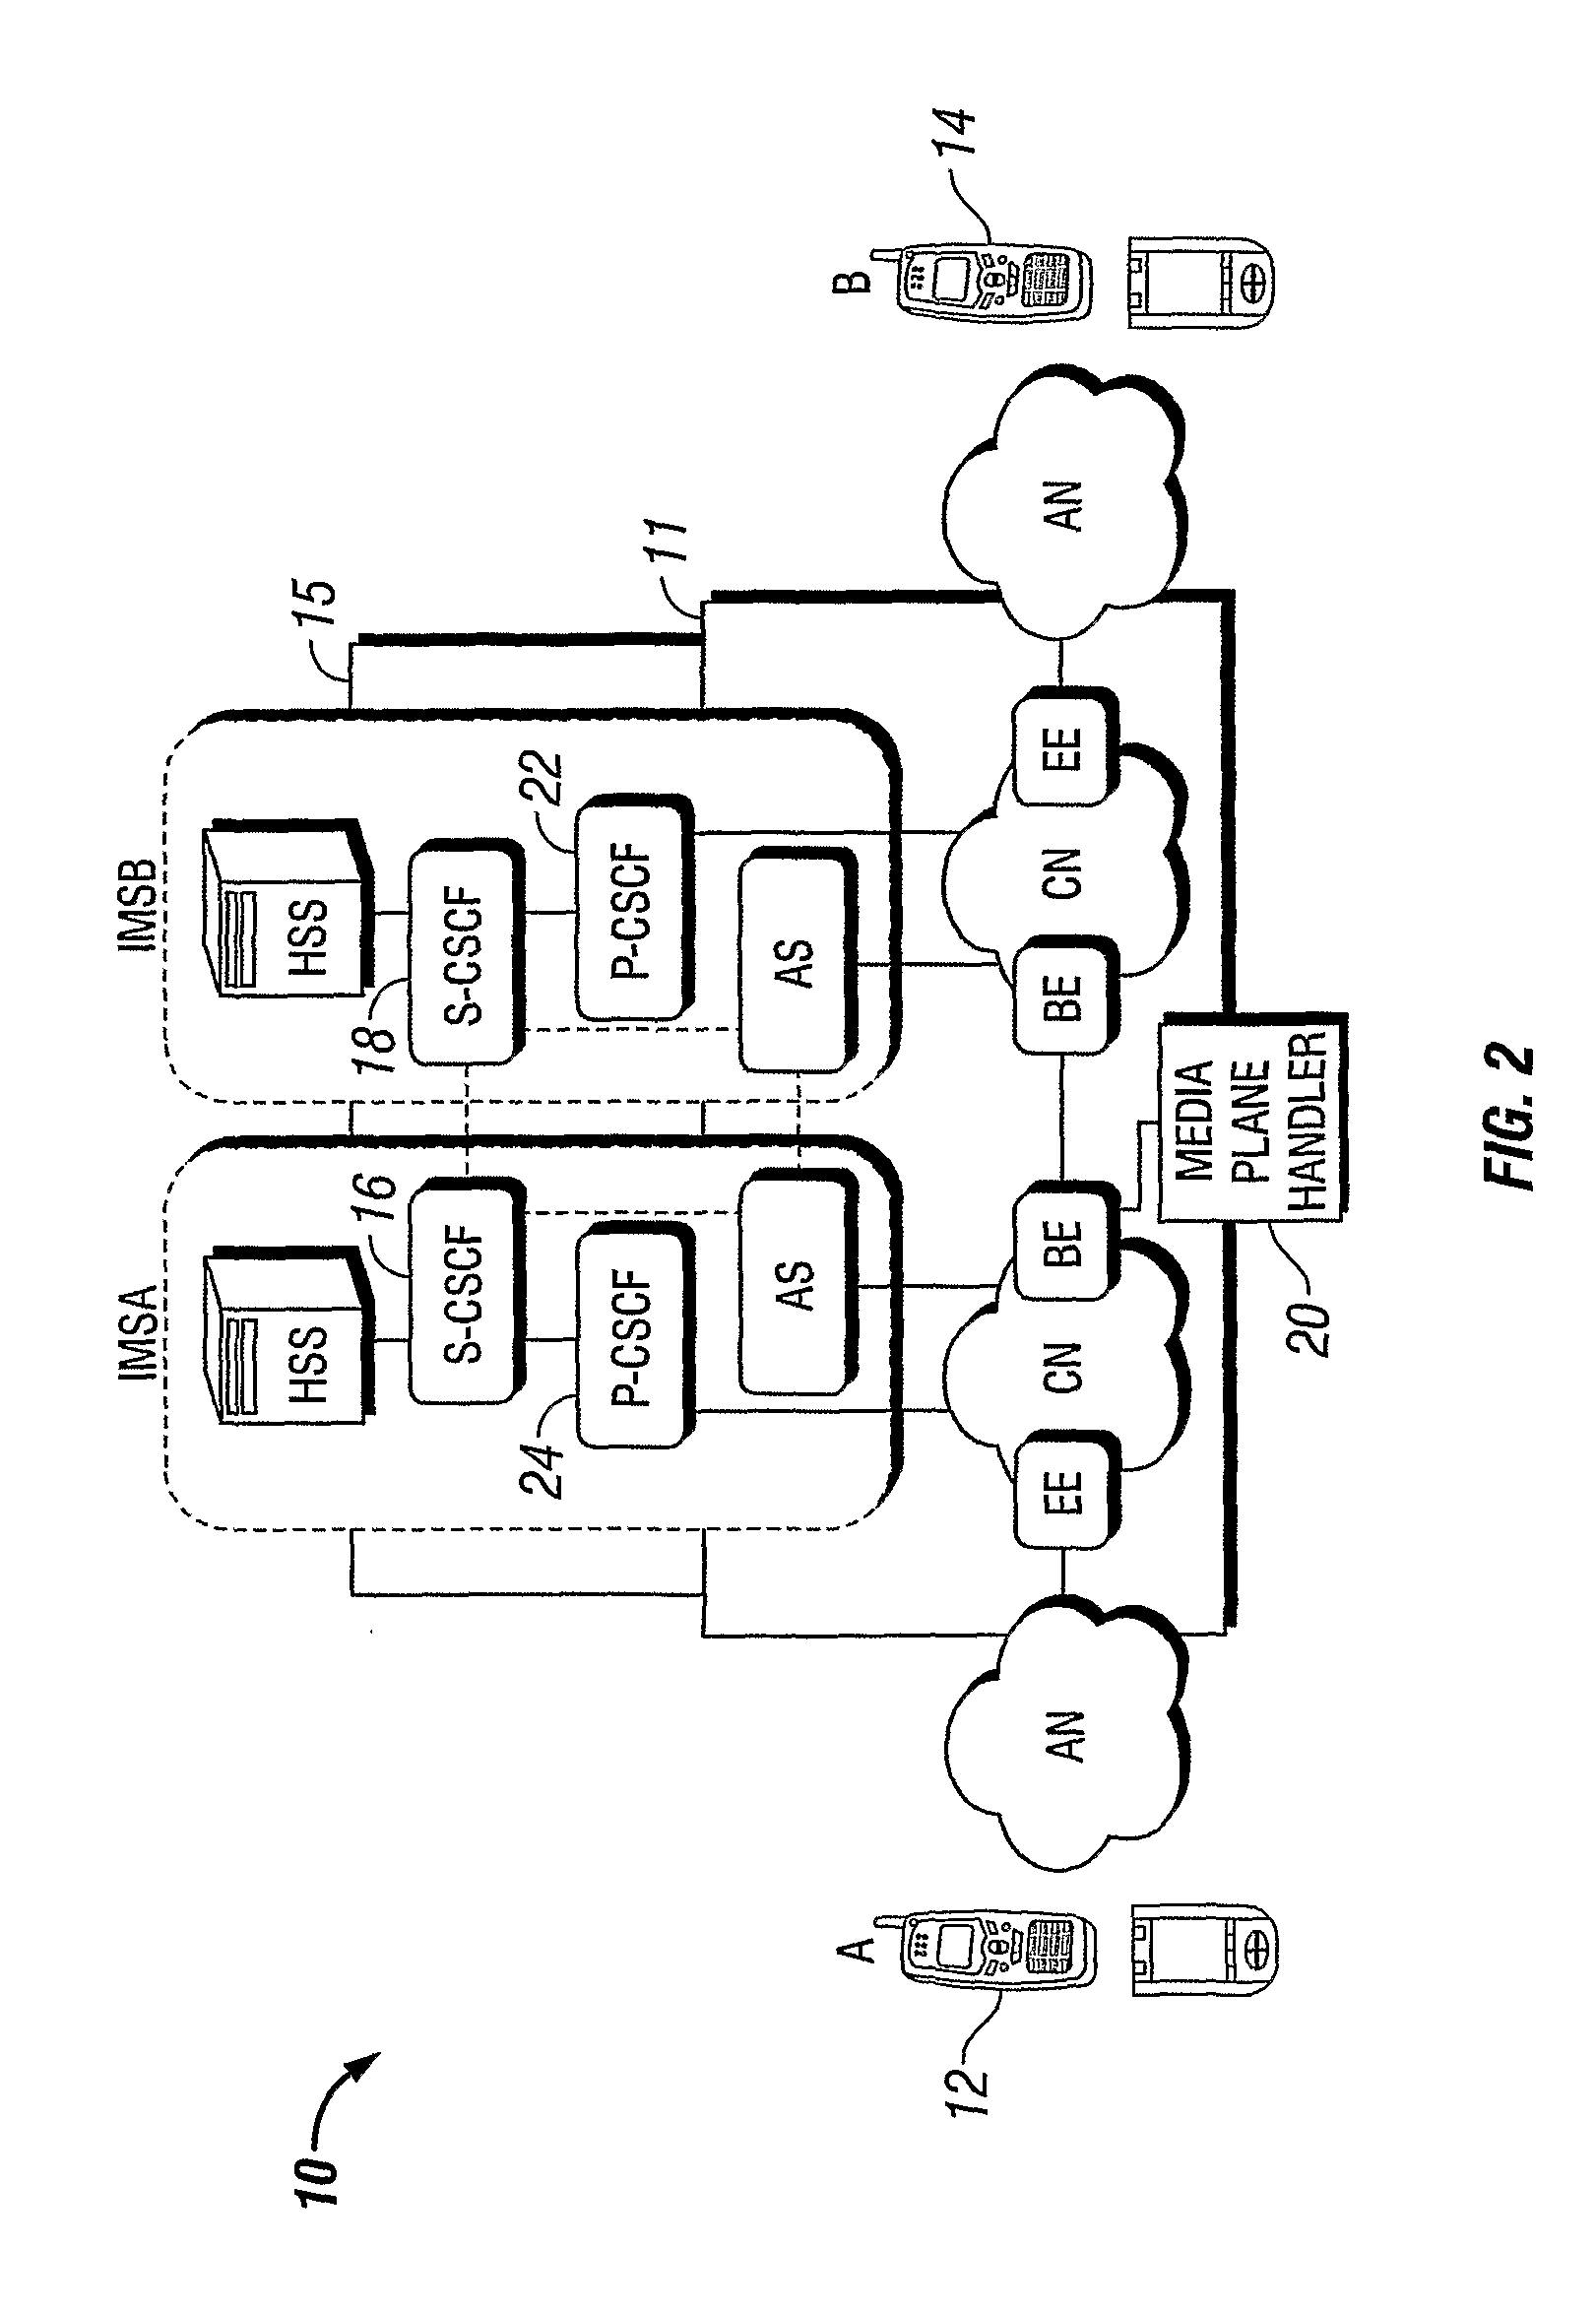 Method and Apparatuses for End-to-Edge Media Protection in ANIMS System